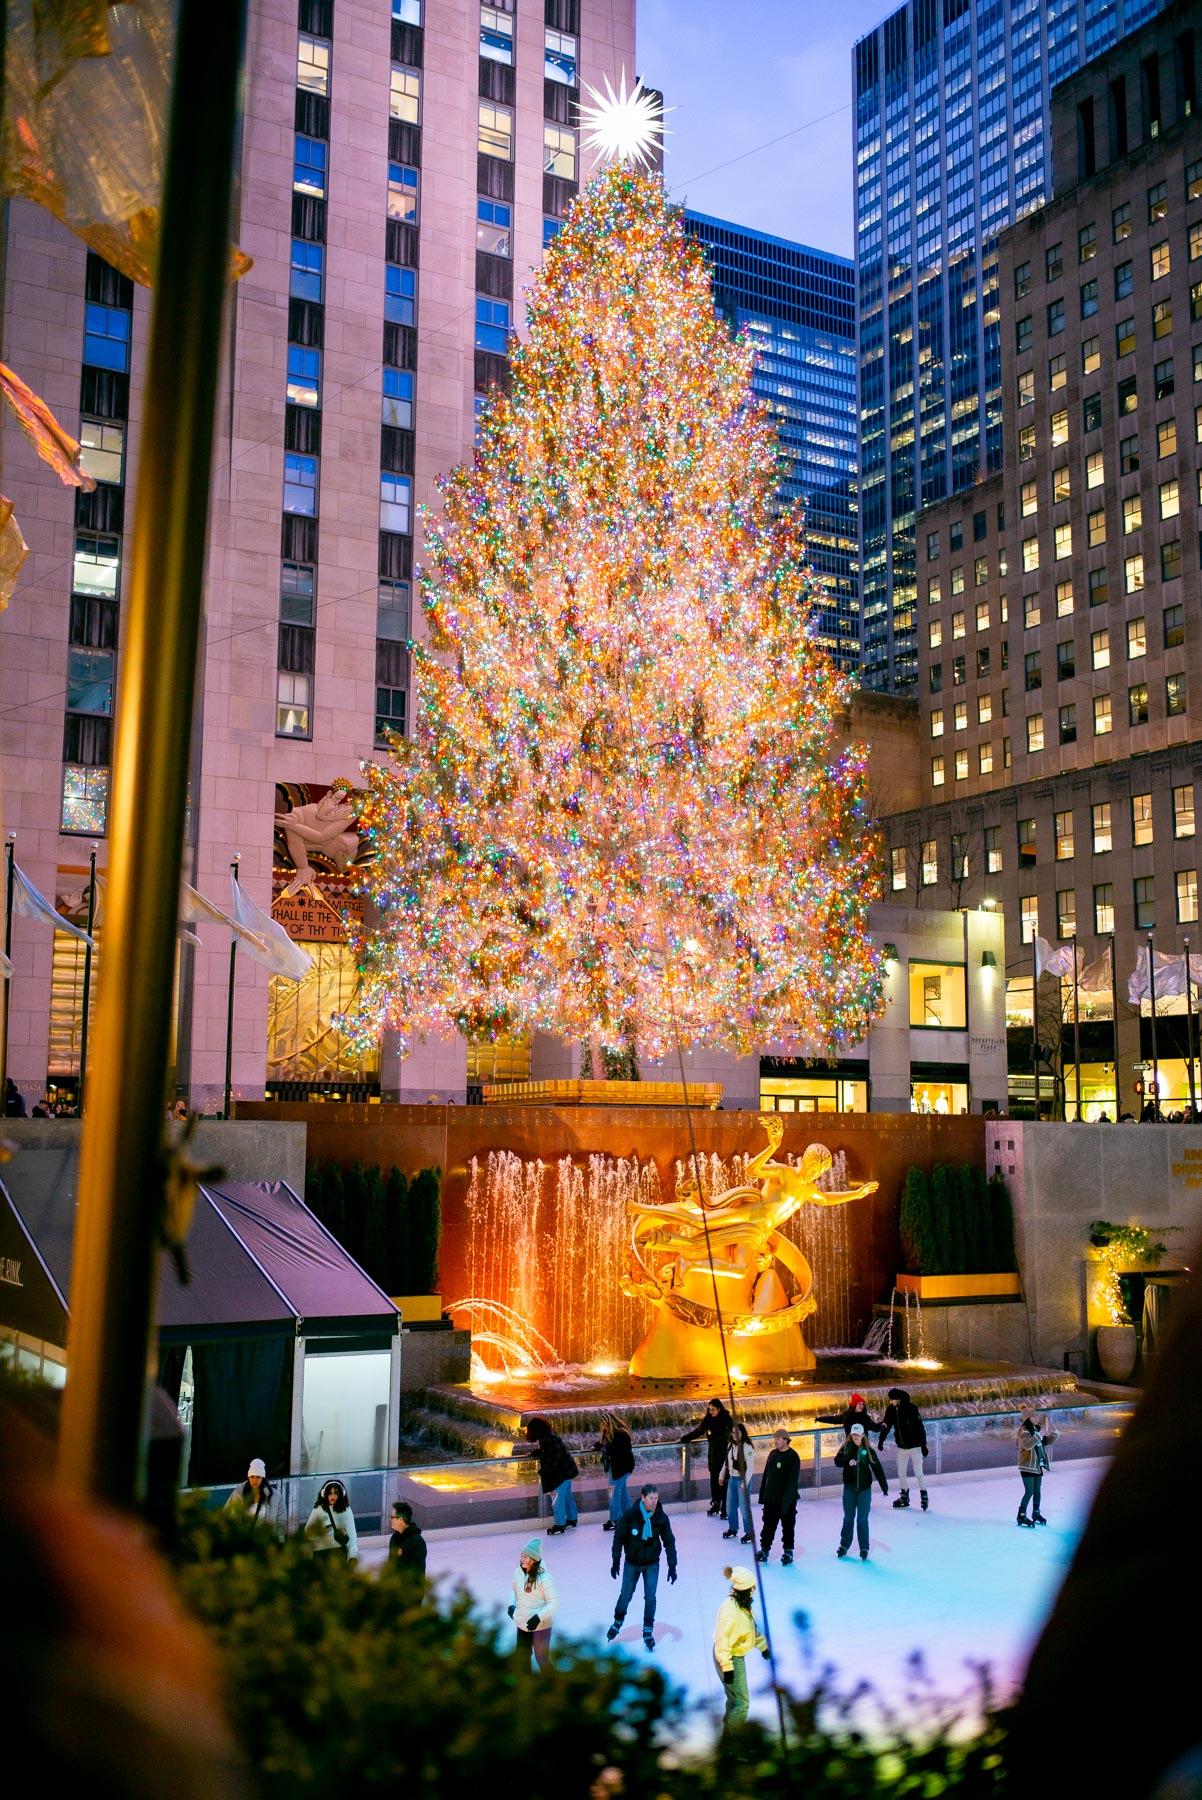 Rockefeller Ice Skating Rink and Christmas Tree, Best things to do in New York City in December